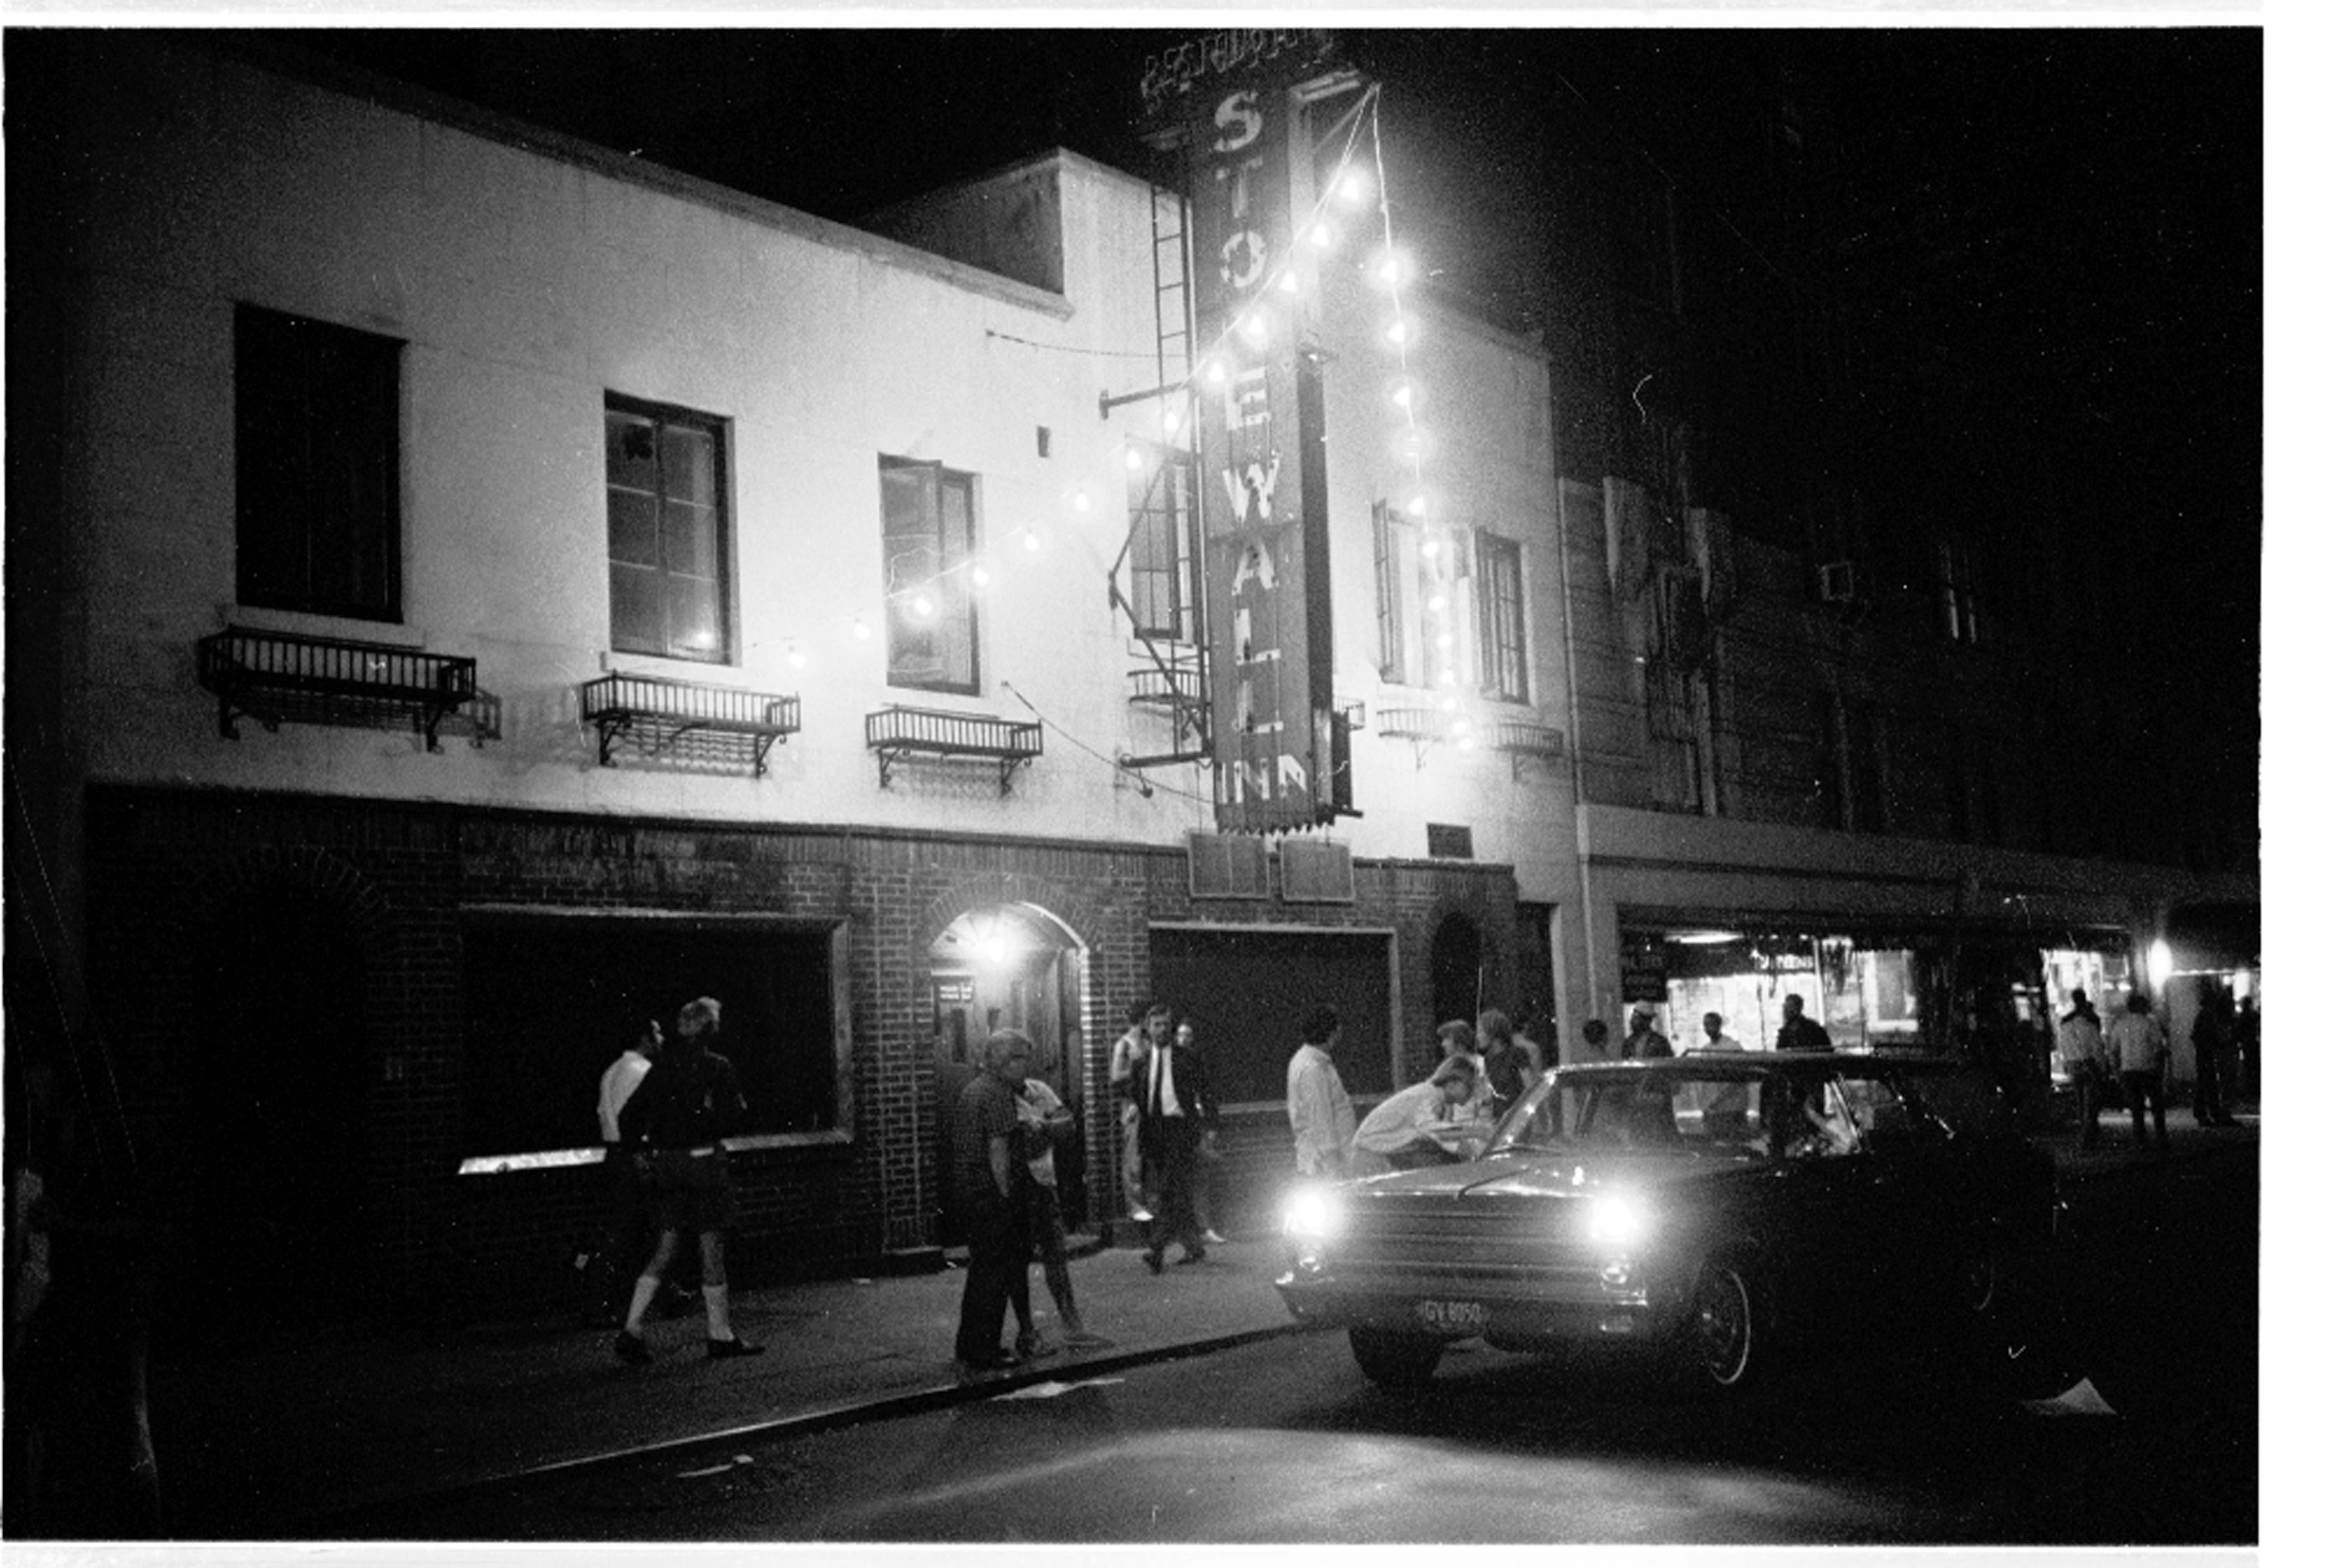 Stonewall Bar in July 1969, as seen in Kate Davis and David Heilbroner’s documentary STONEWALL UPRISING.  A First Run Features Release.  Photo by Larry Morris / The New York Times.